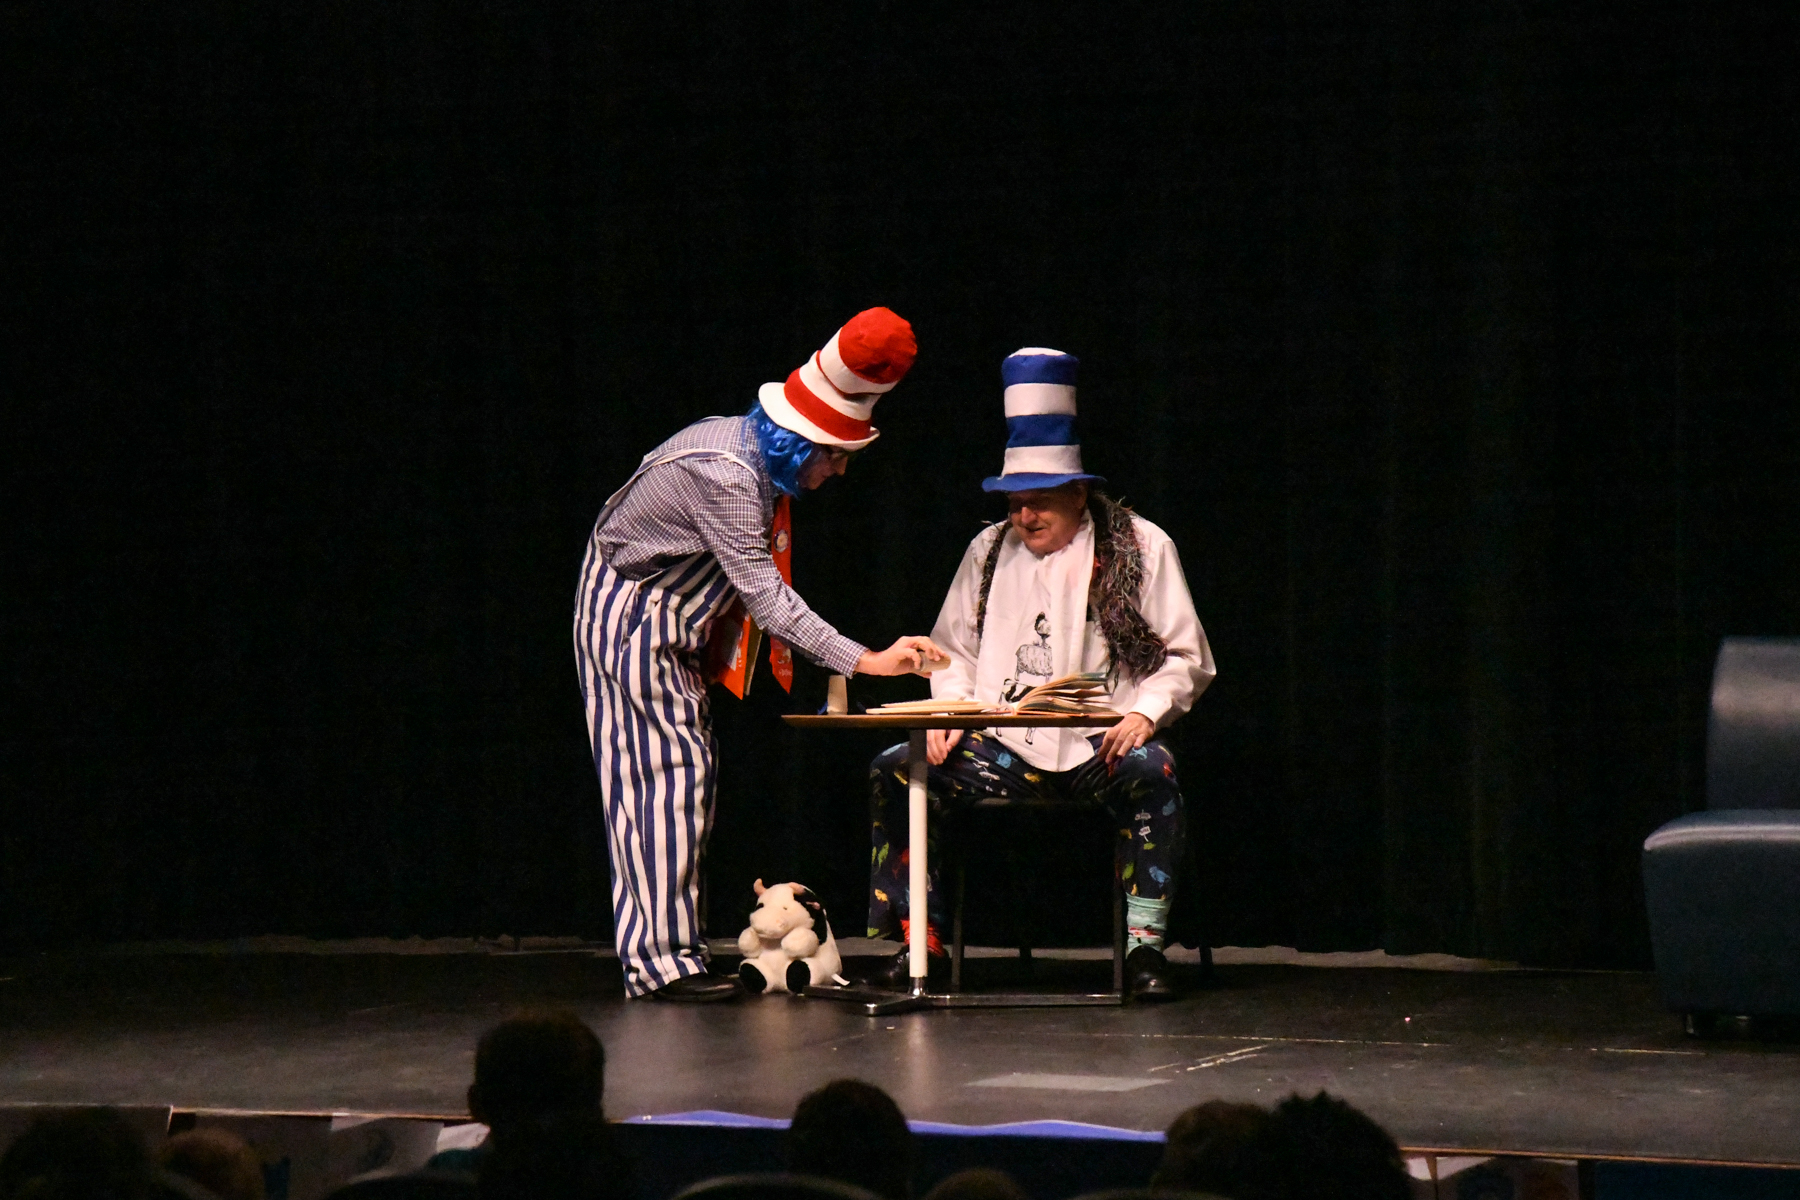 One annual tradition of the Dr. Seuss Event is the presentation of Green Eggs and Ham – this year performed by Peru State Foundation Interim Director Ted L. Harshbarger (l) and Dean of Arts and Sciences Dr. Paul Hinrichs.